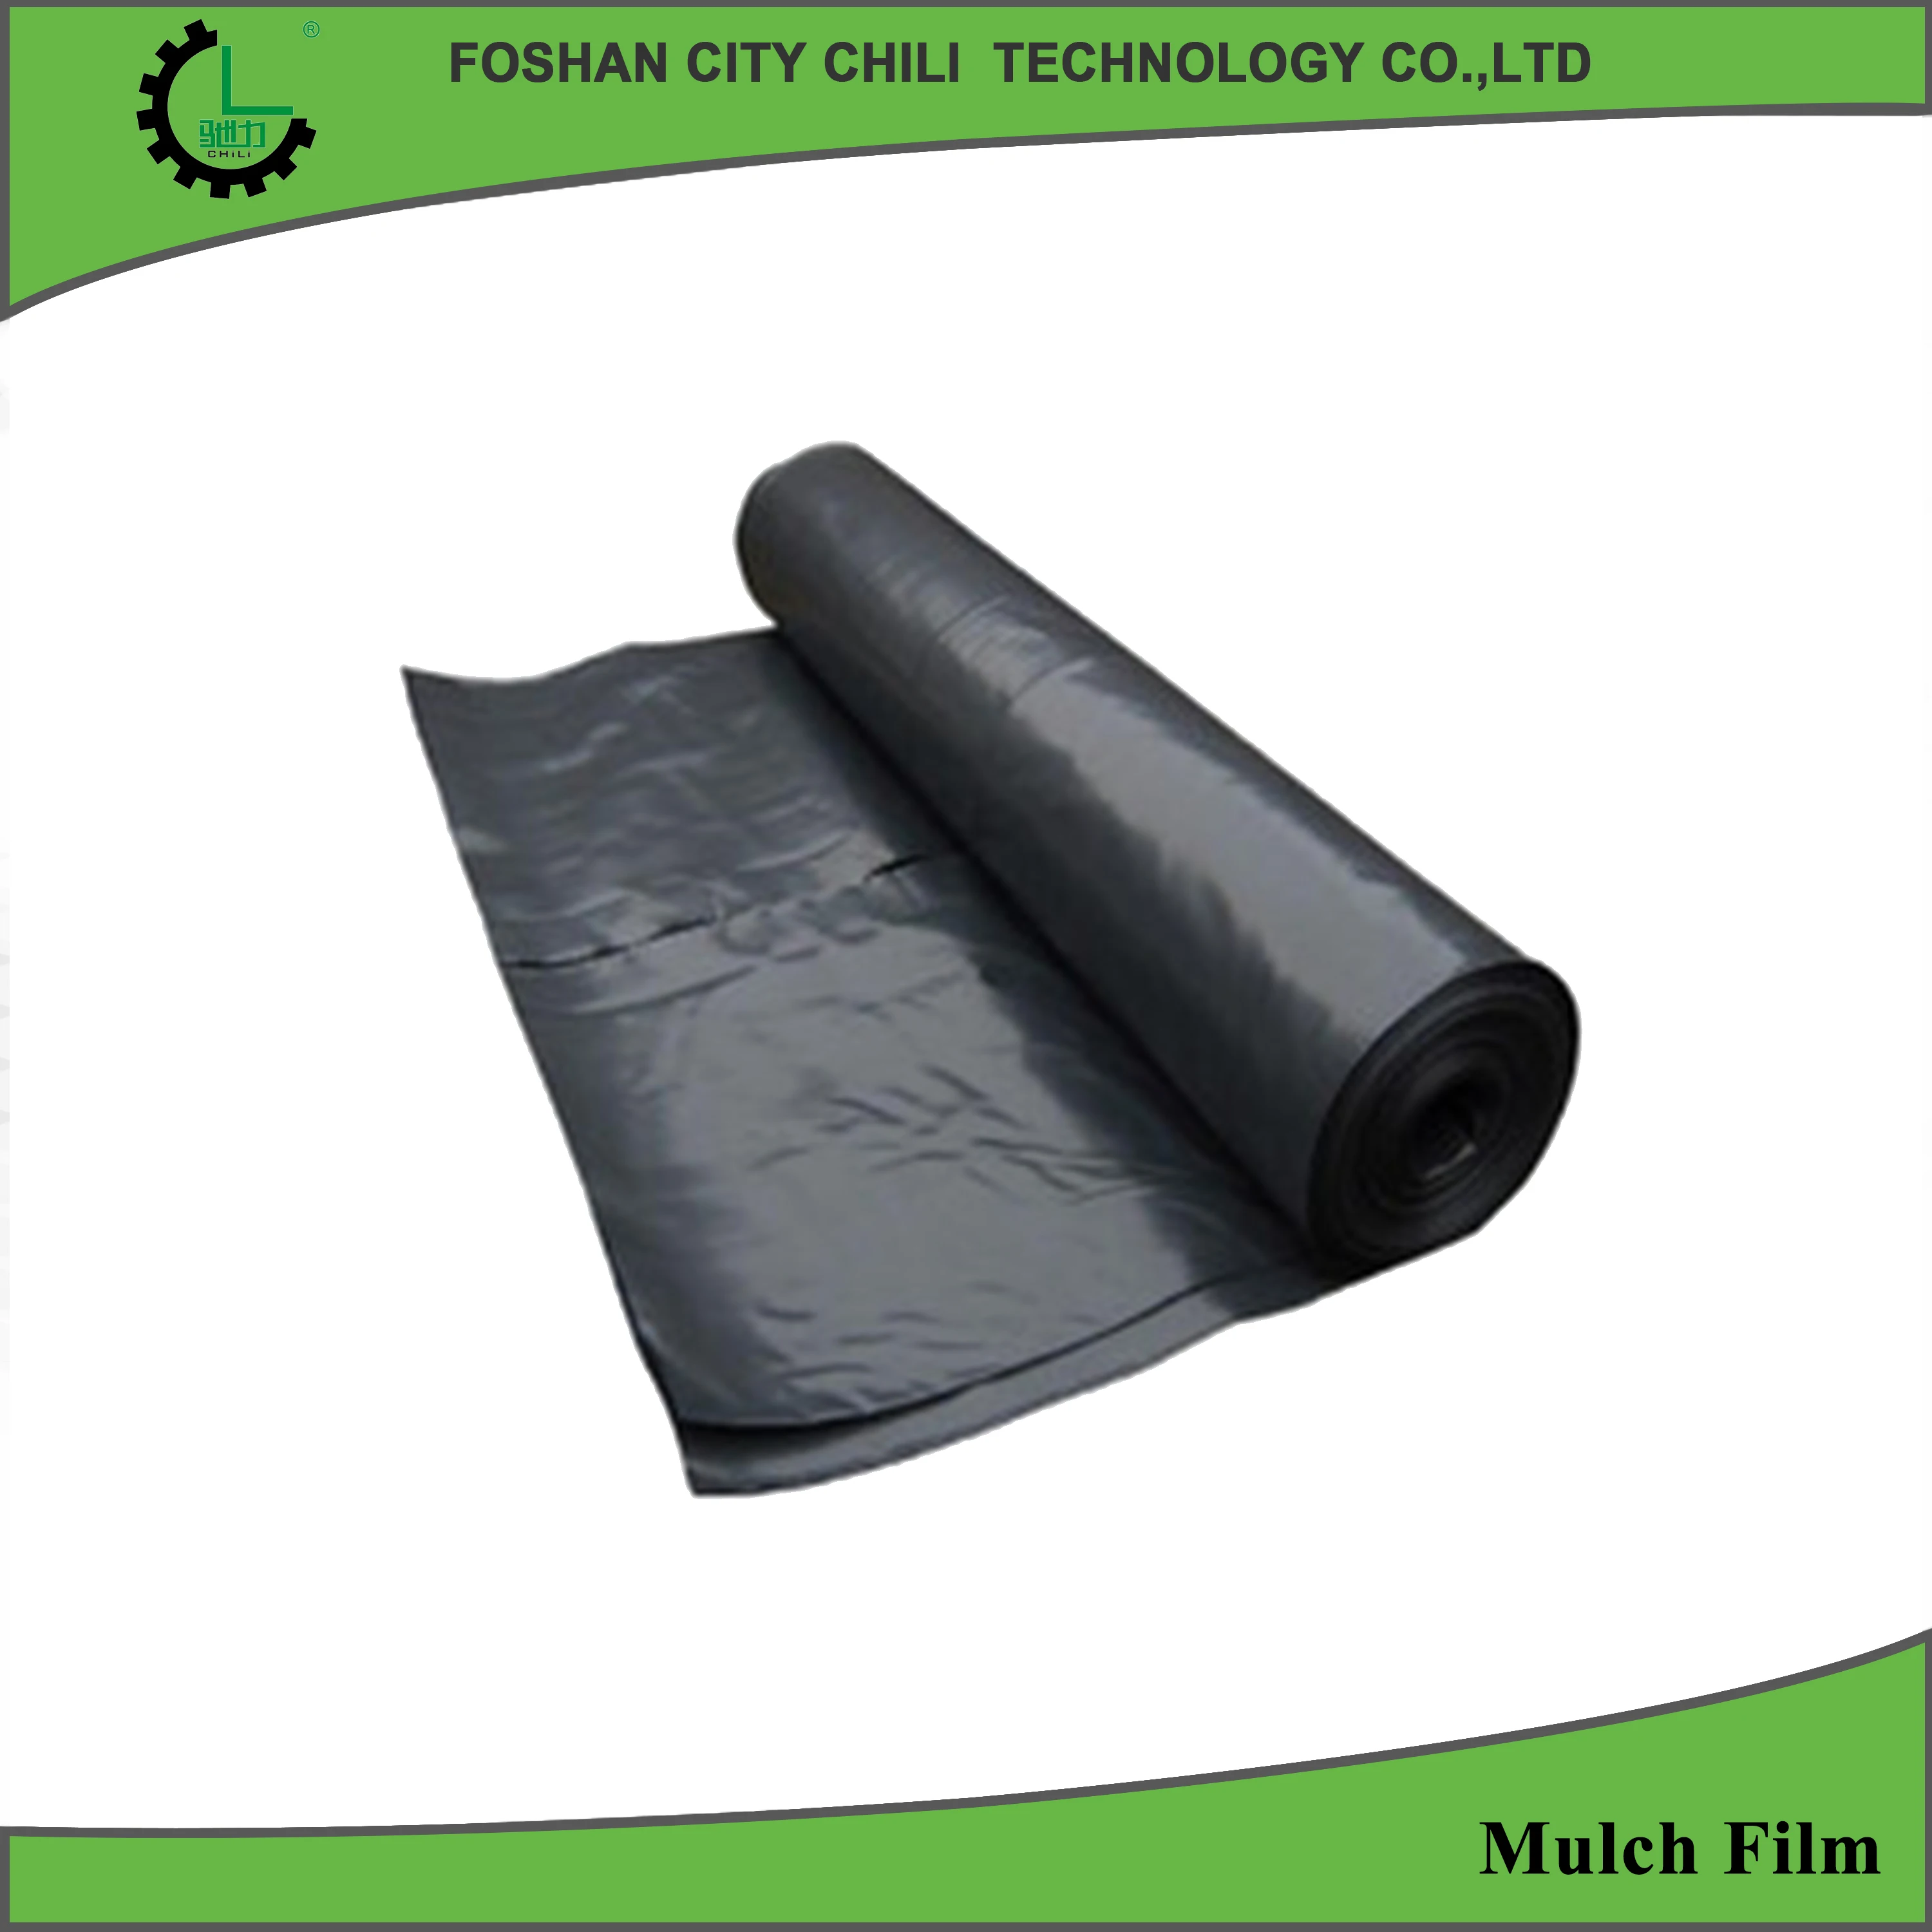 
Perforated plastic mulch film use for vegetable planting 